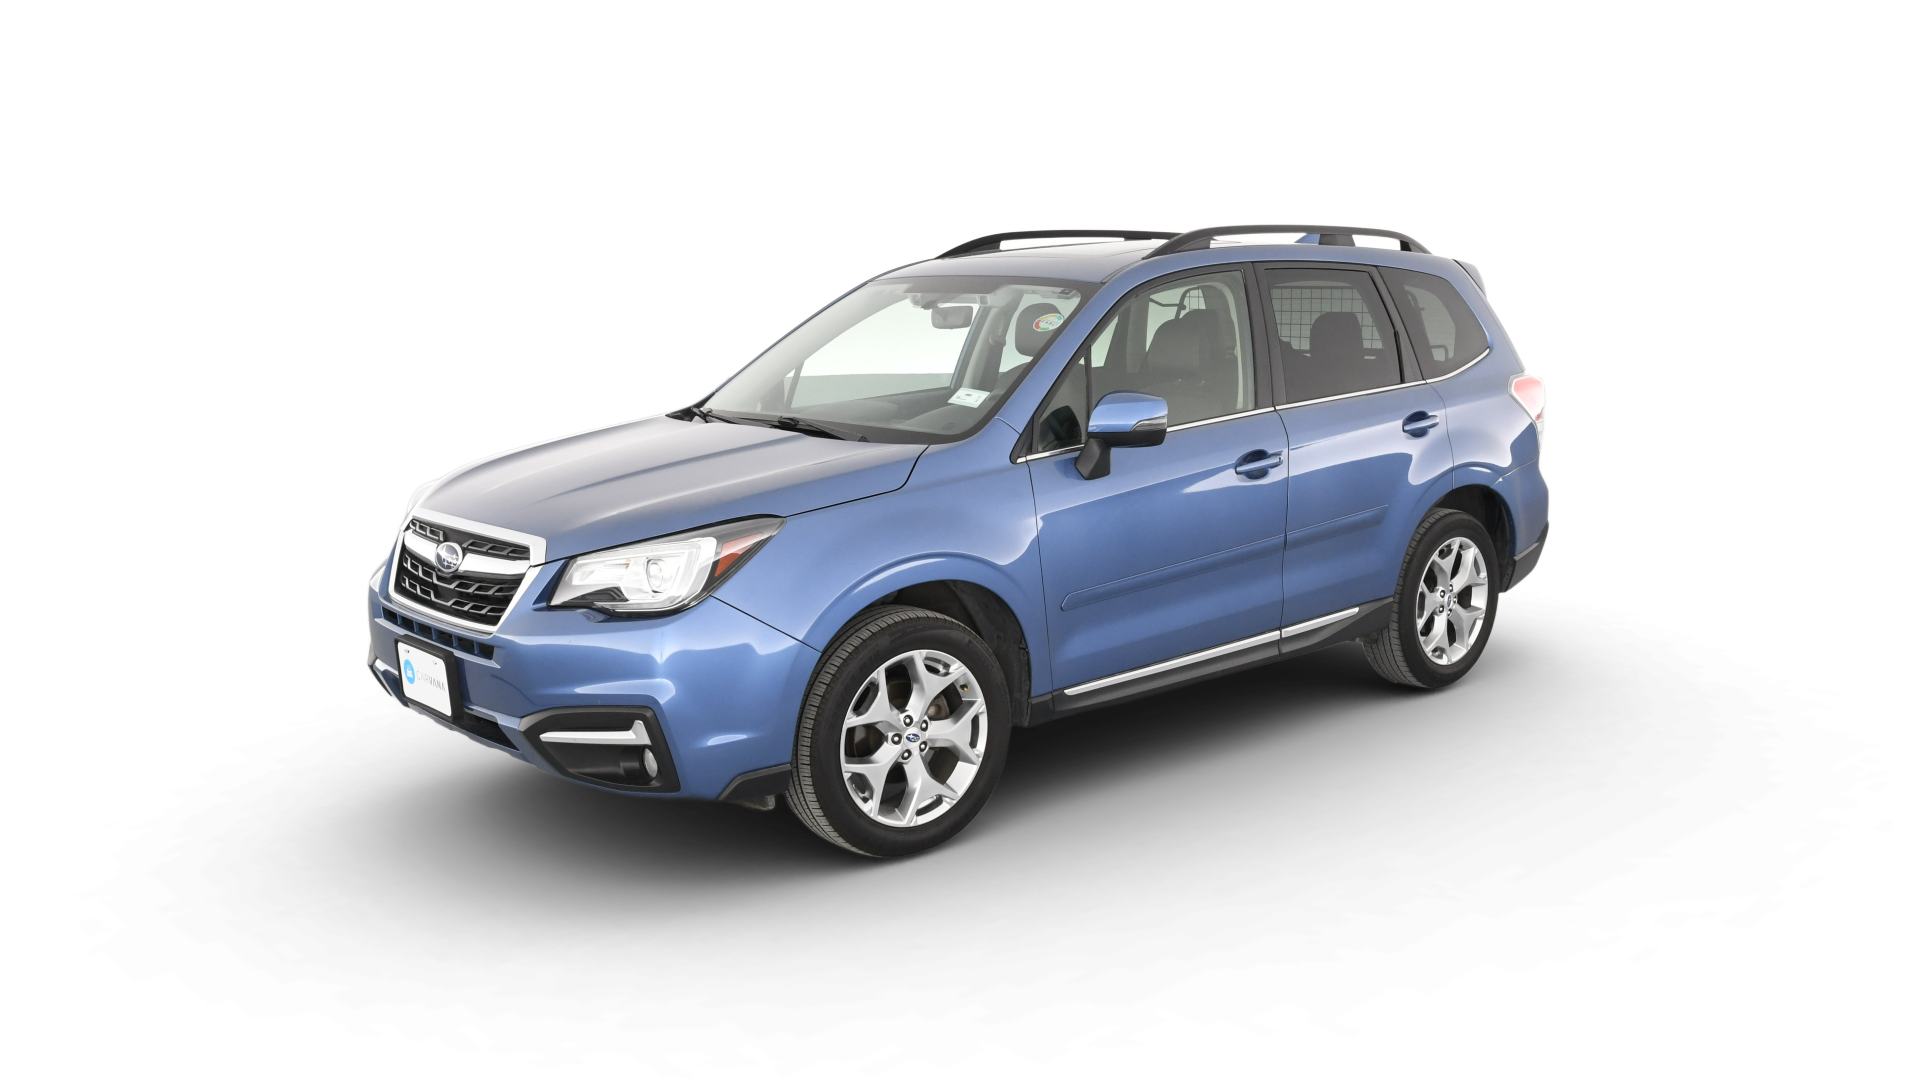 Used 2018 Subaru Forester For Sale Online | Carvana